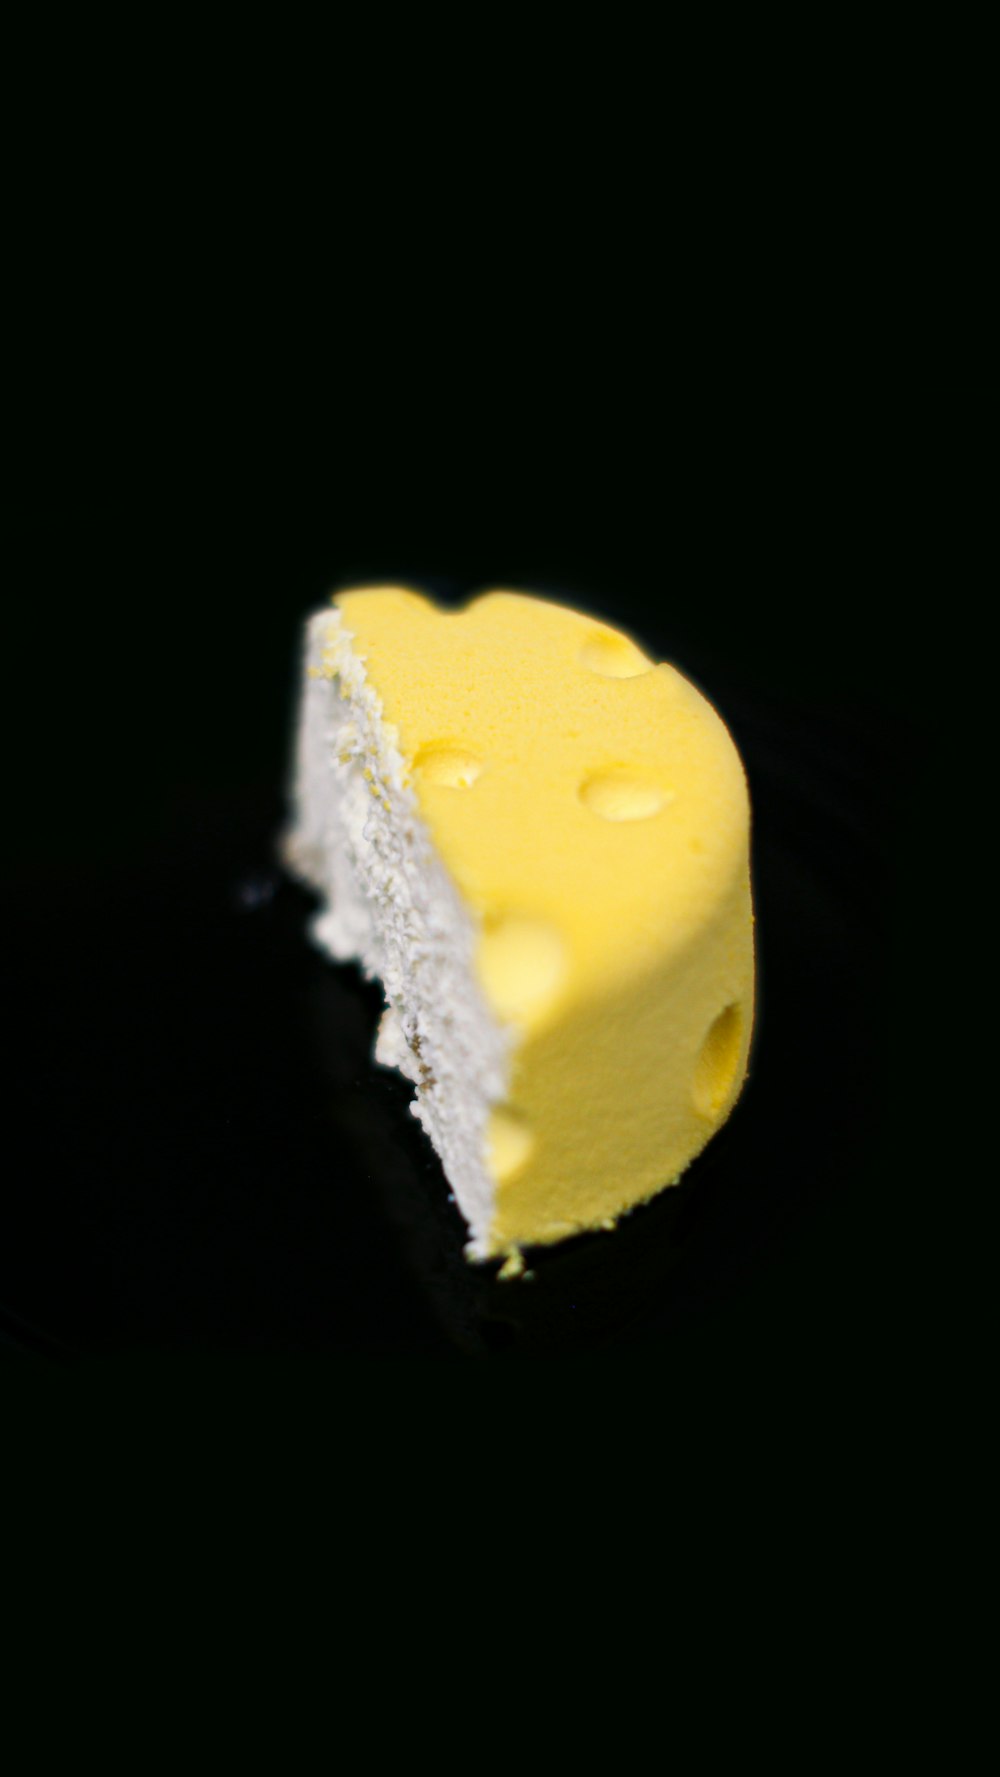 yellow and white cake on black surface